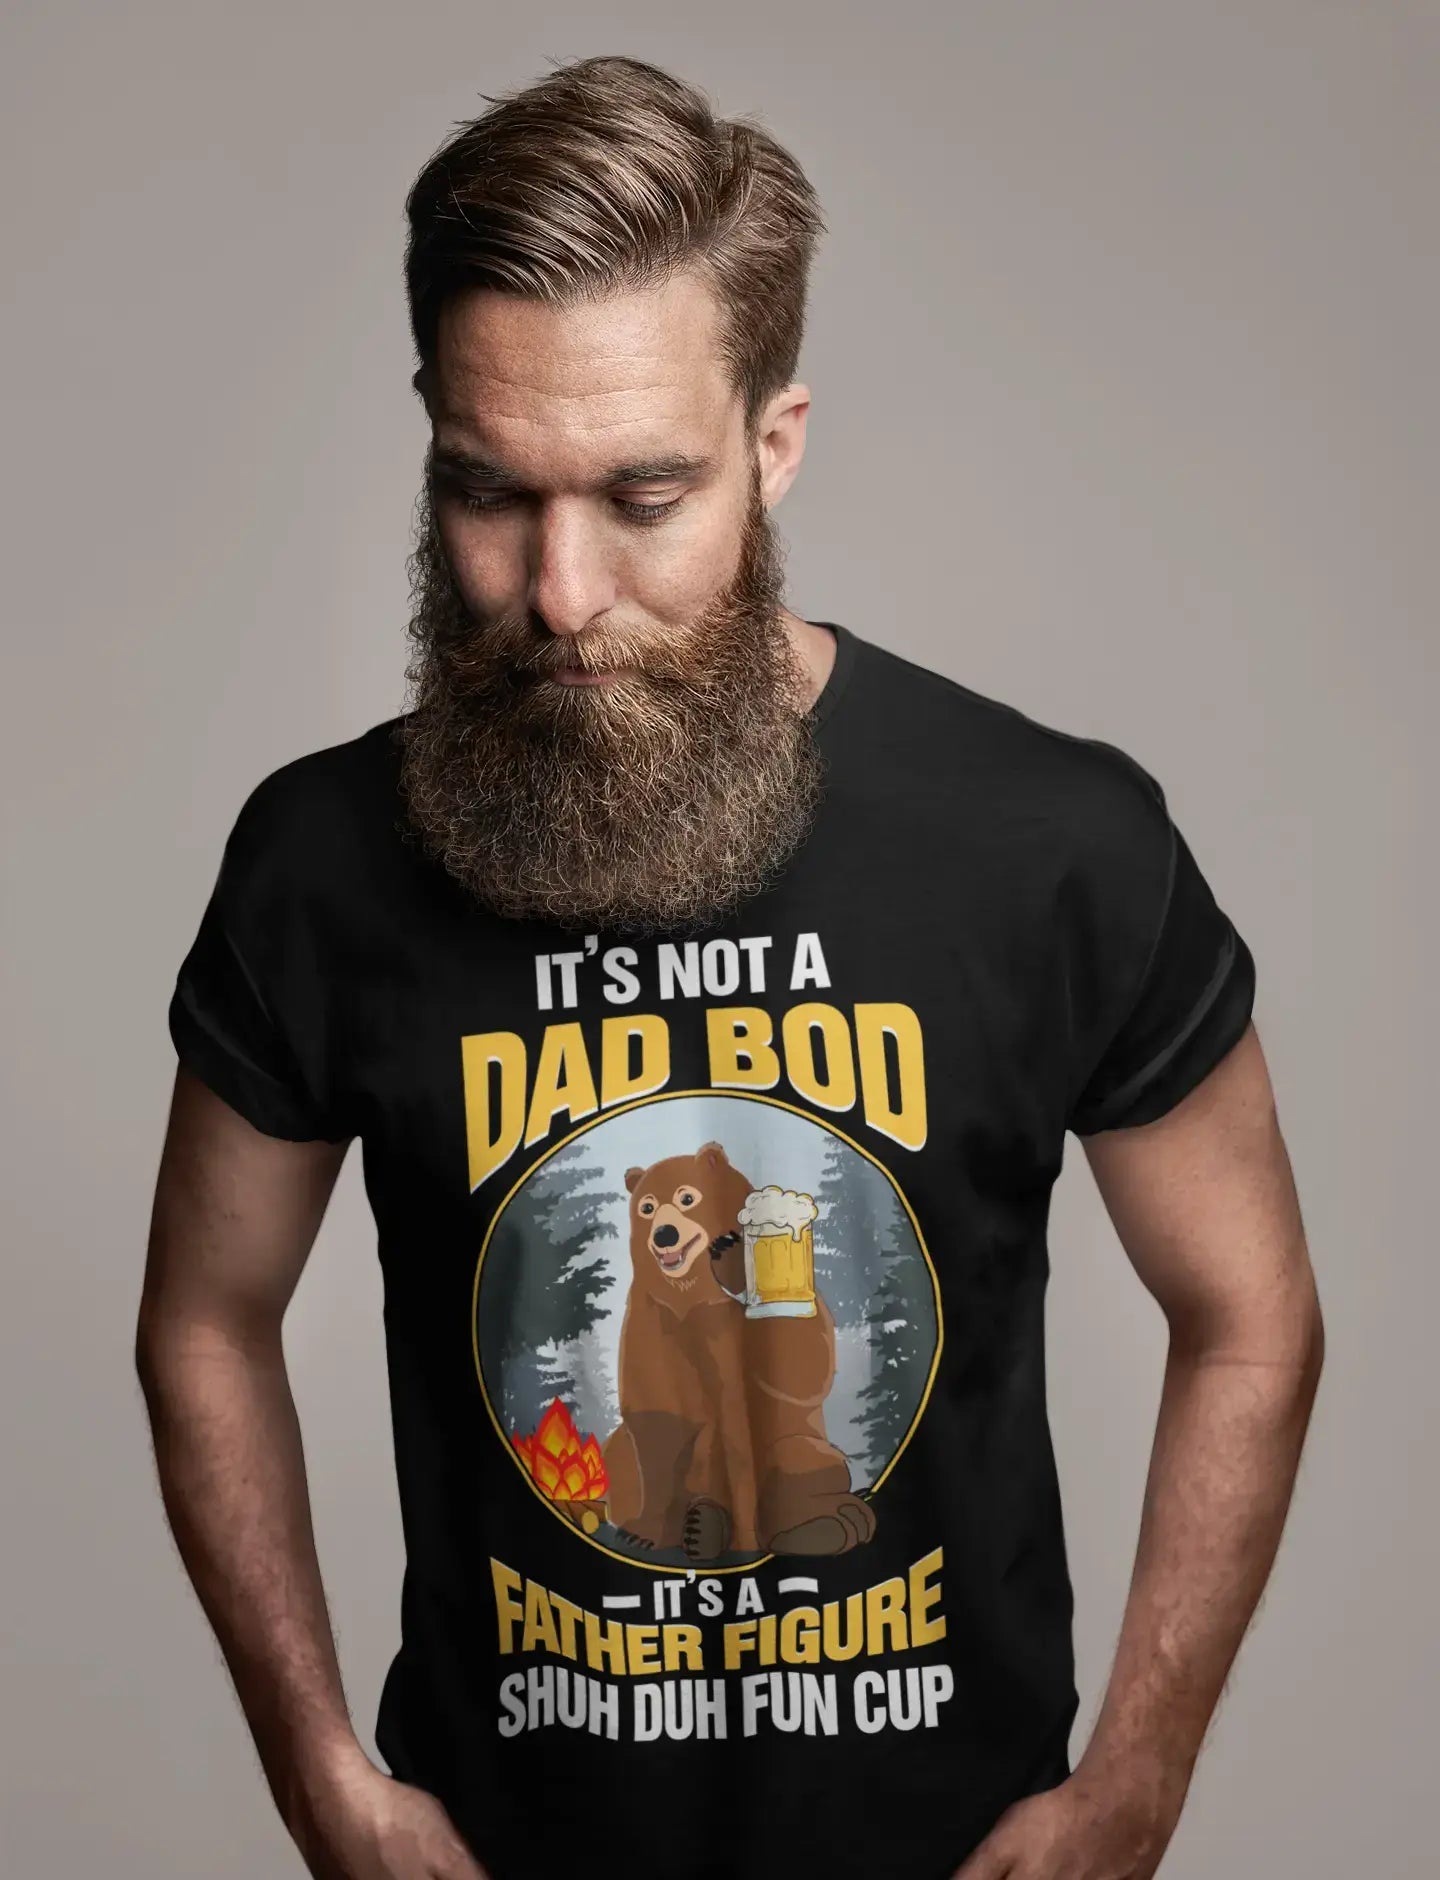 ULTRABASIC Men's Funny T-Shirt It's Not a Dad Bod It's a Father Figure - Bear Beer Lover Tee Shirt